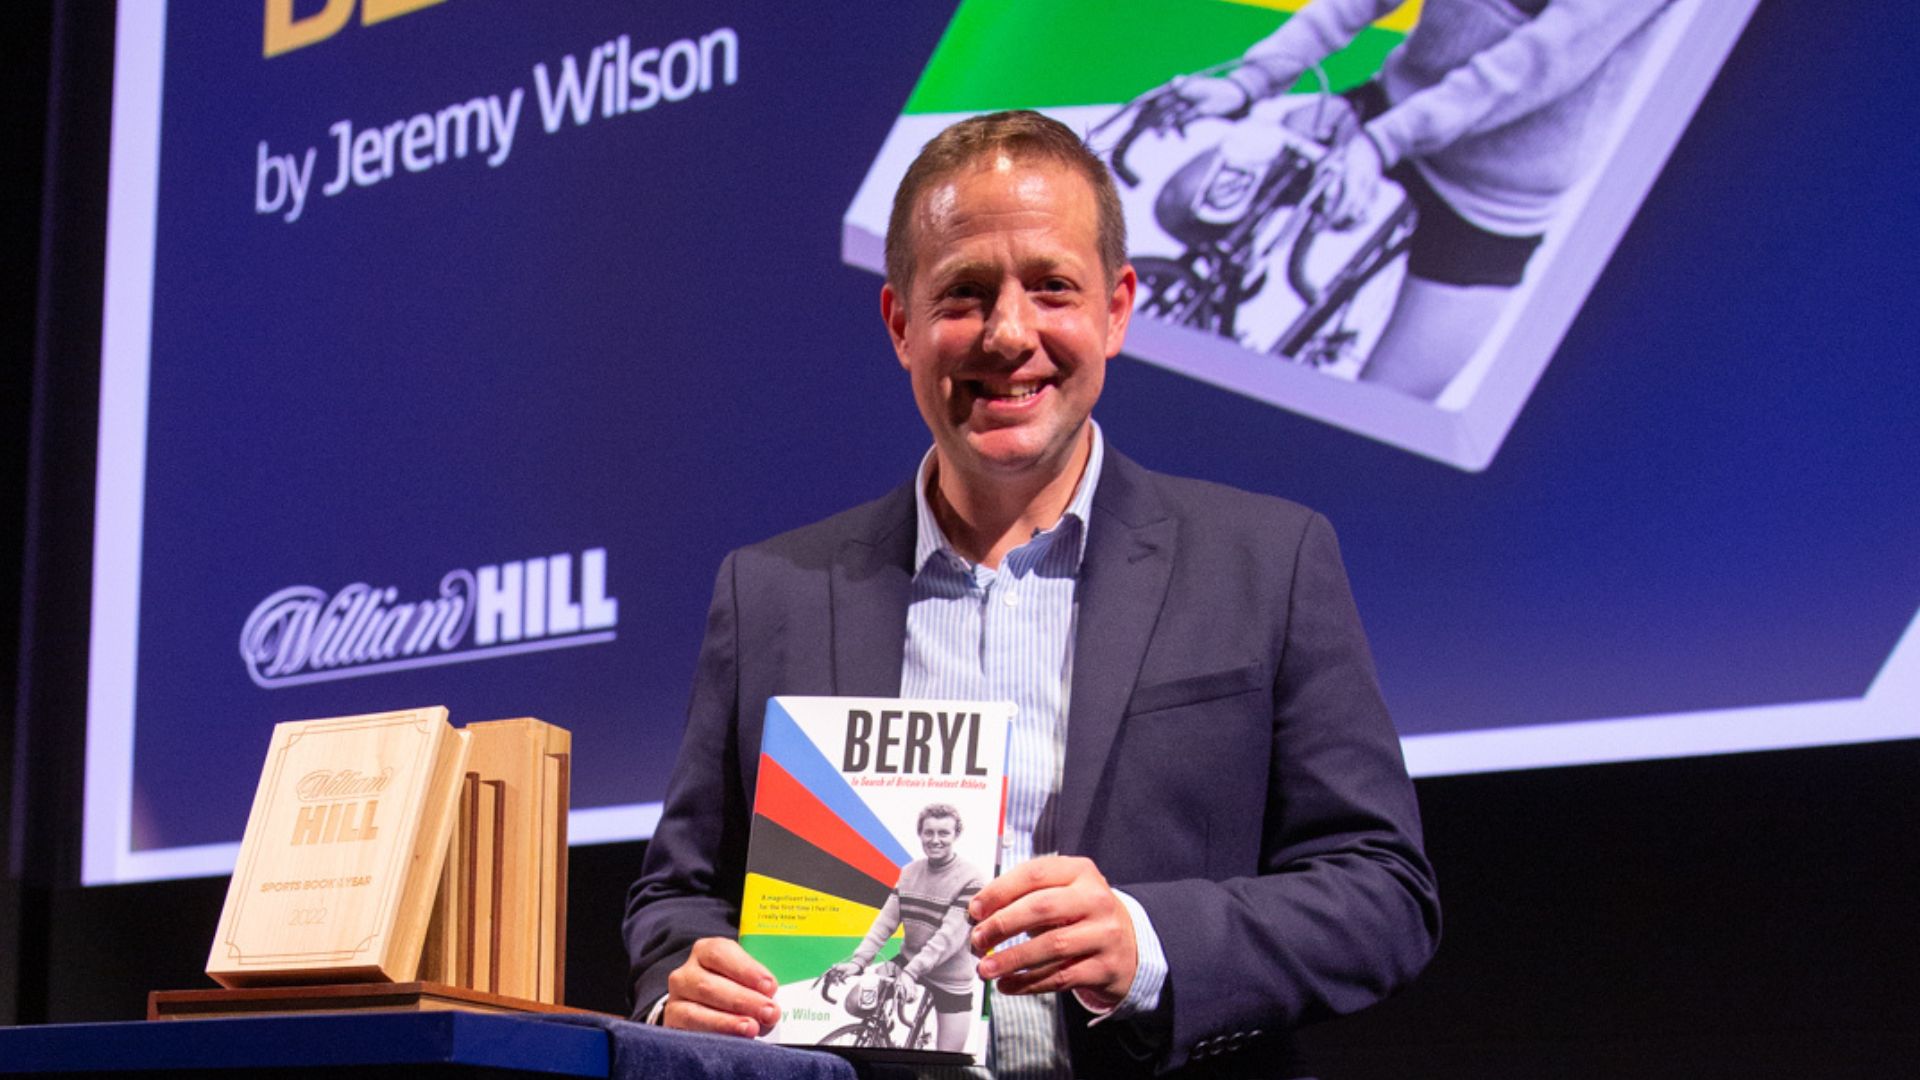 Jeremy Wilson, winner of The William Hill Sports Book of the Year Award 2022